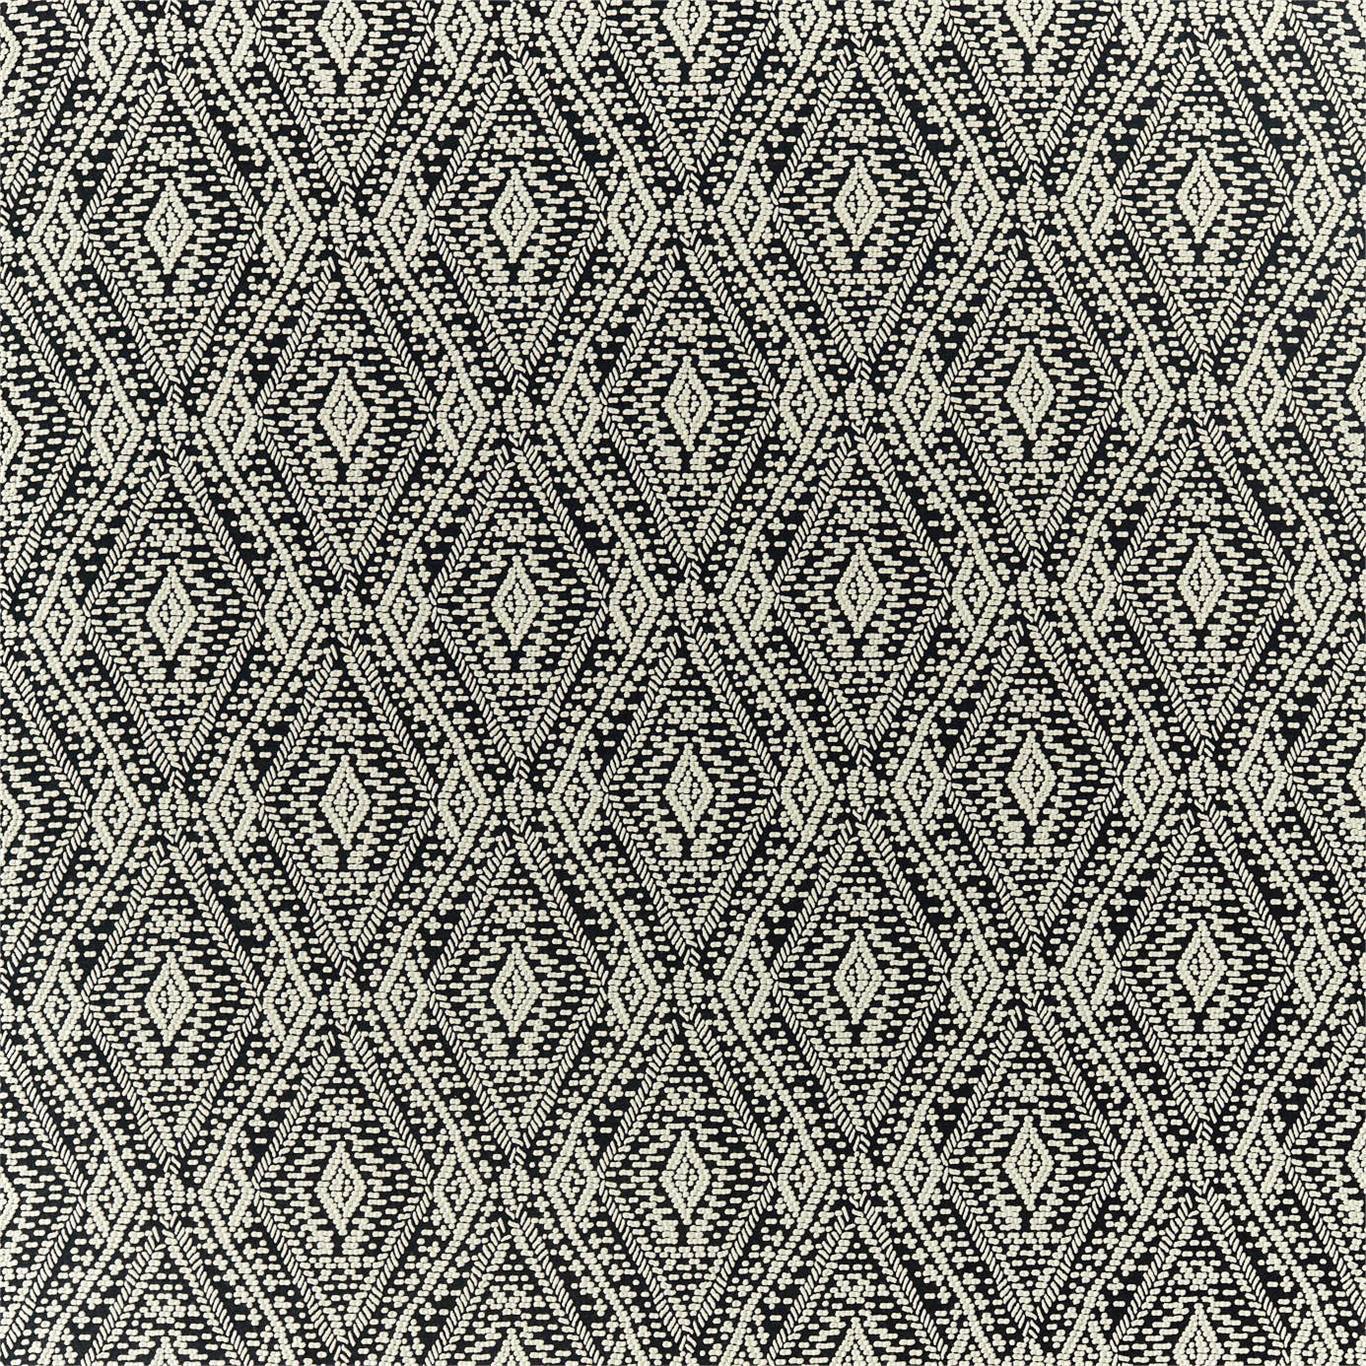 Turaco Fabric by Harlequin